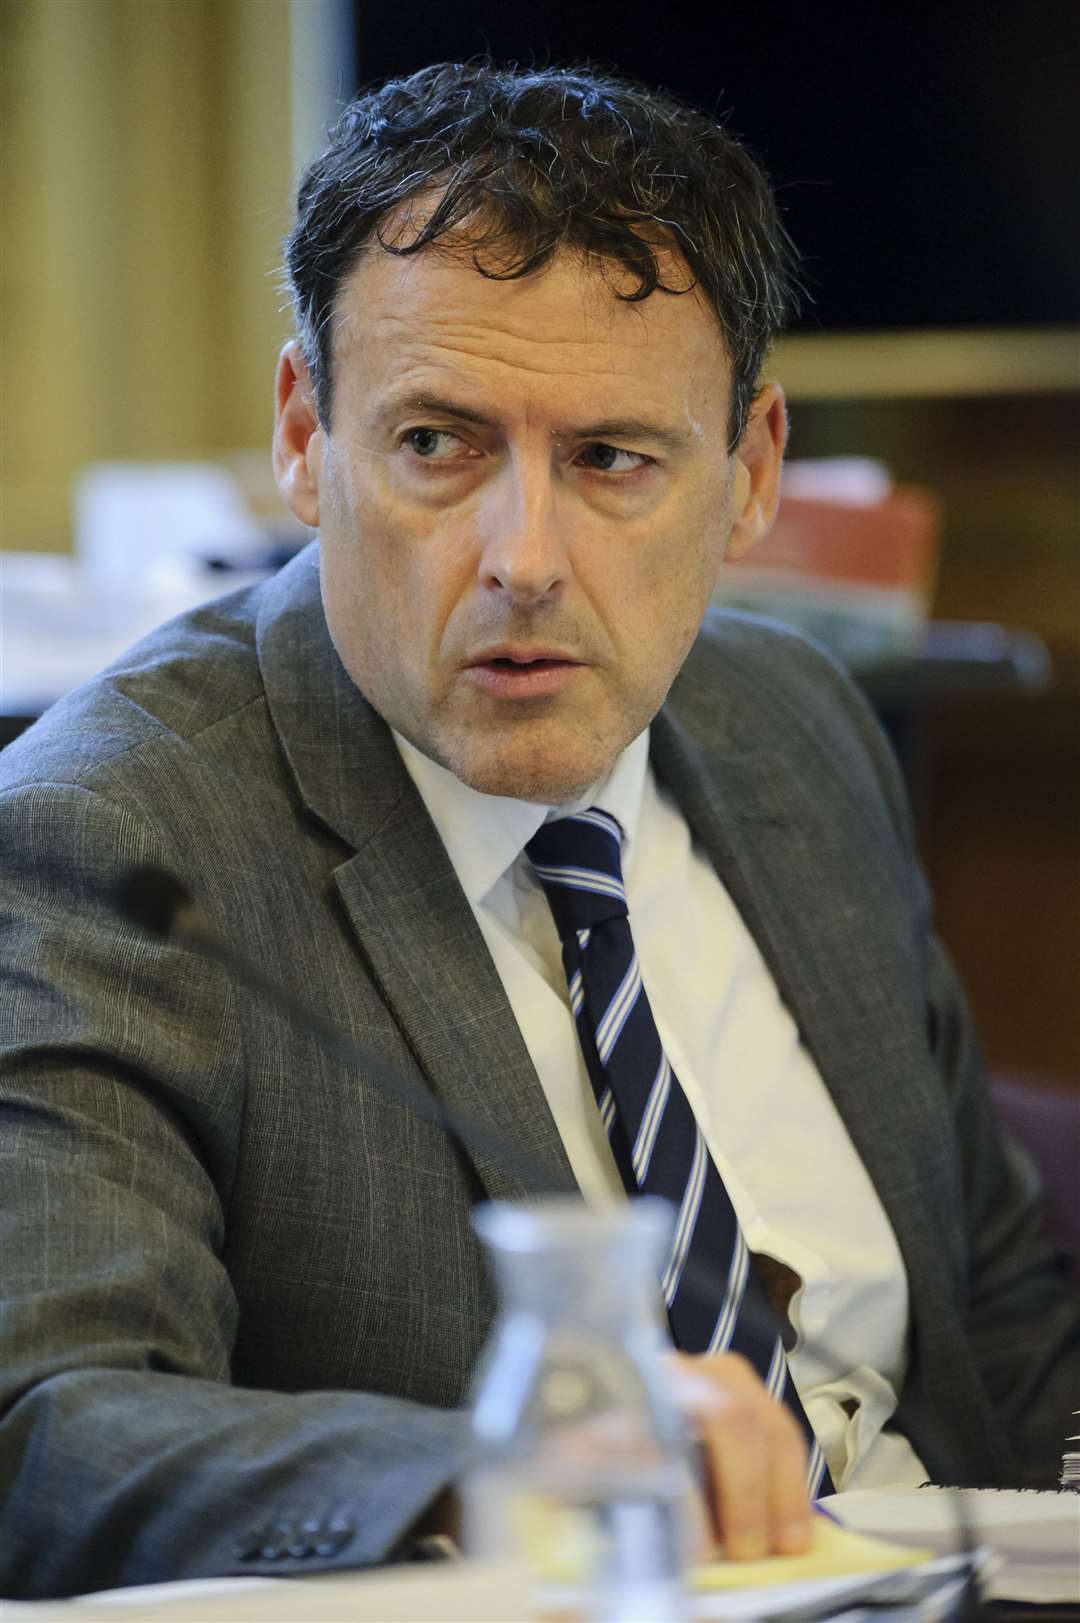 The council's head of planning Rob Jarman. The rogue decision was issued under his name.